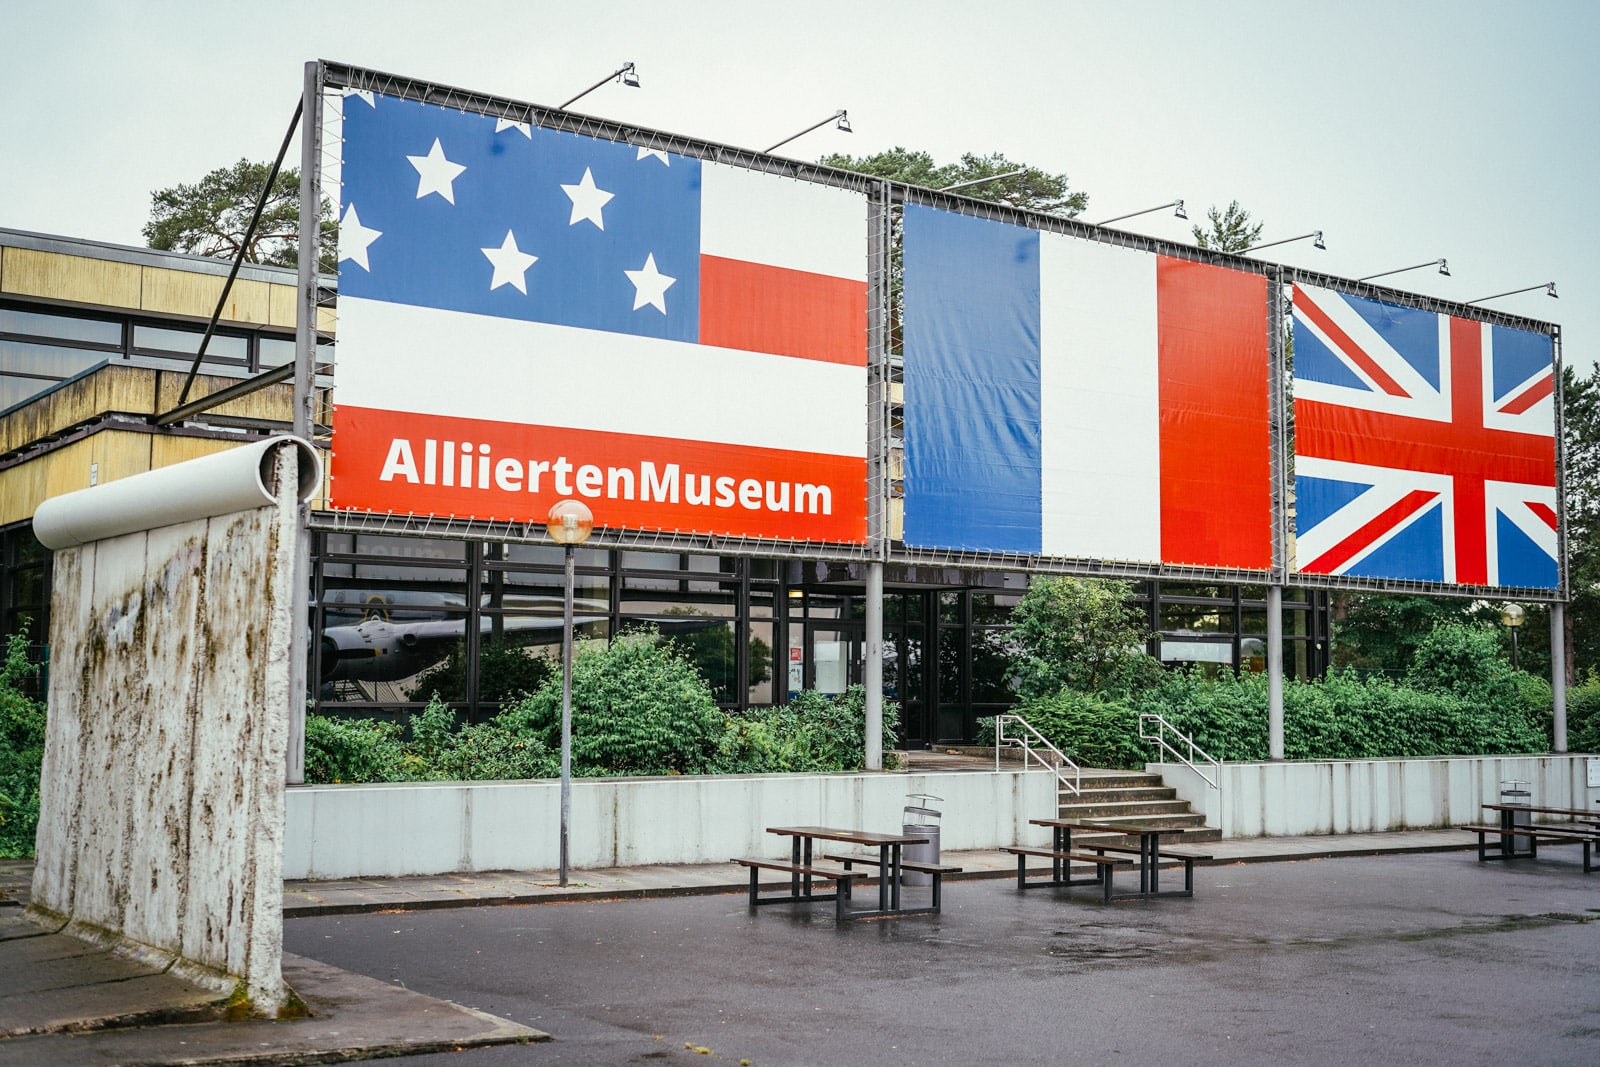 The Allied Museum in Dahlem